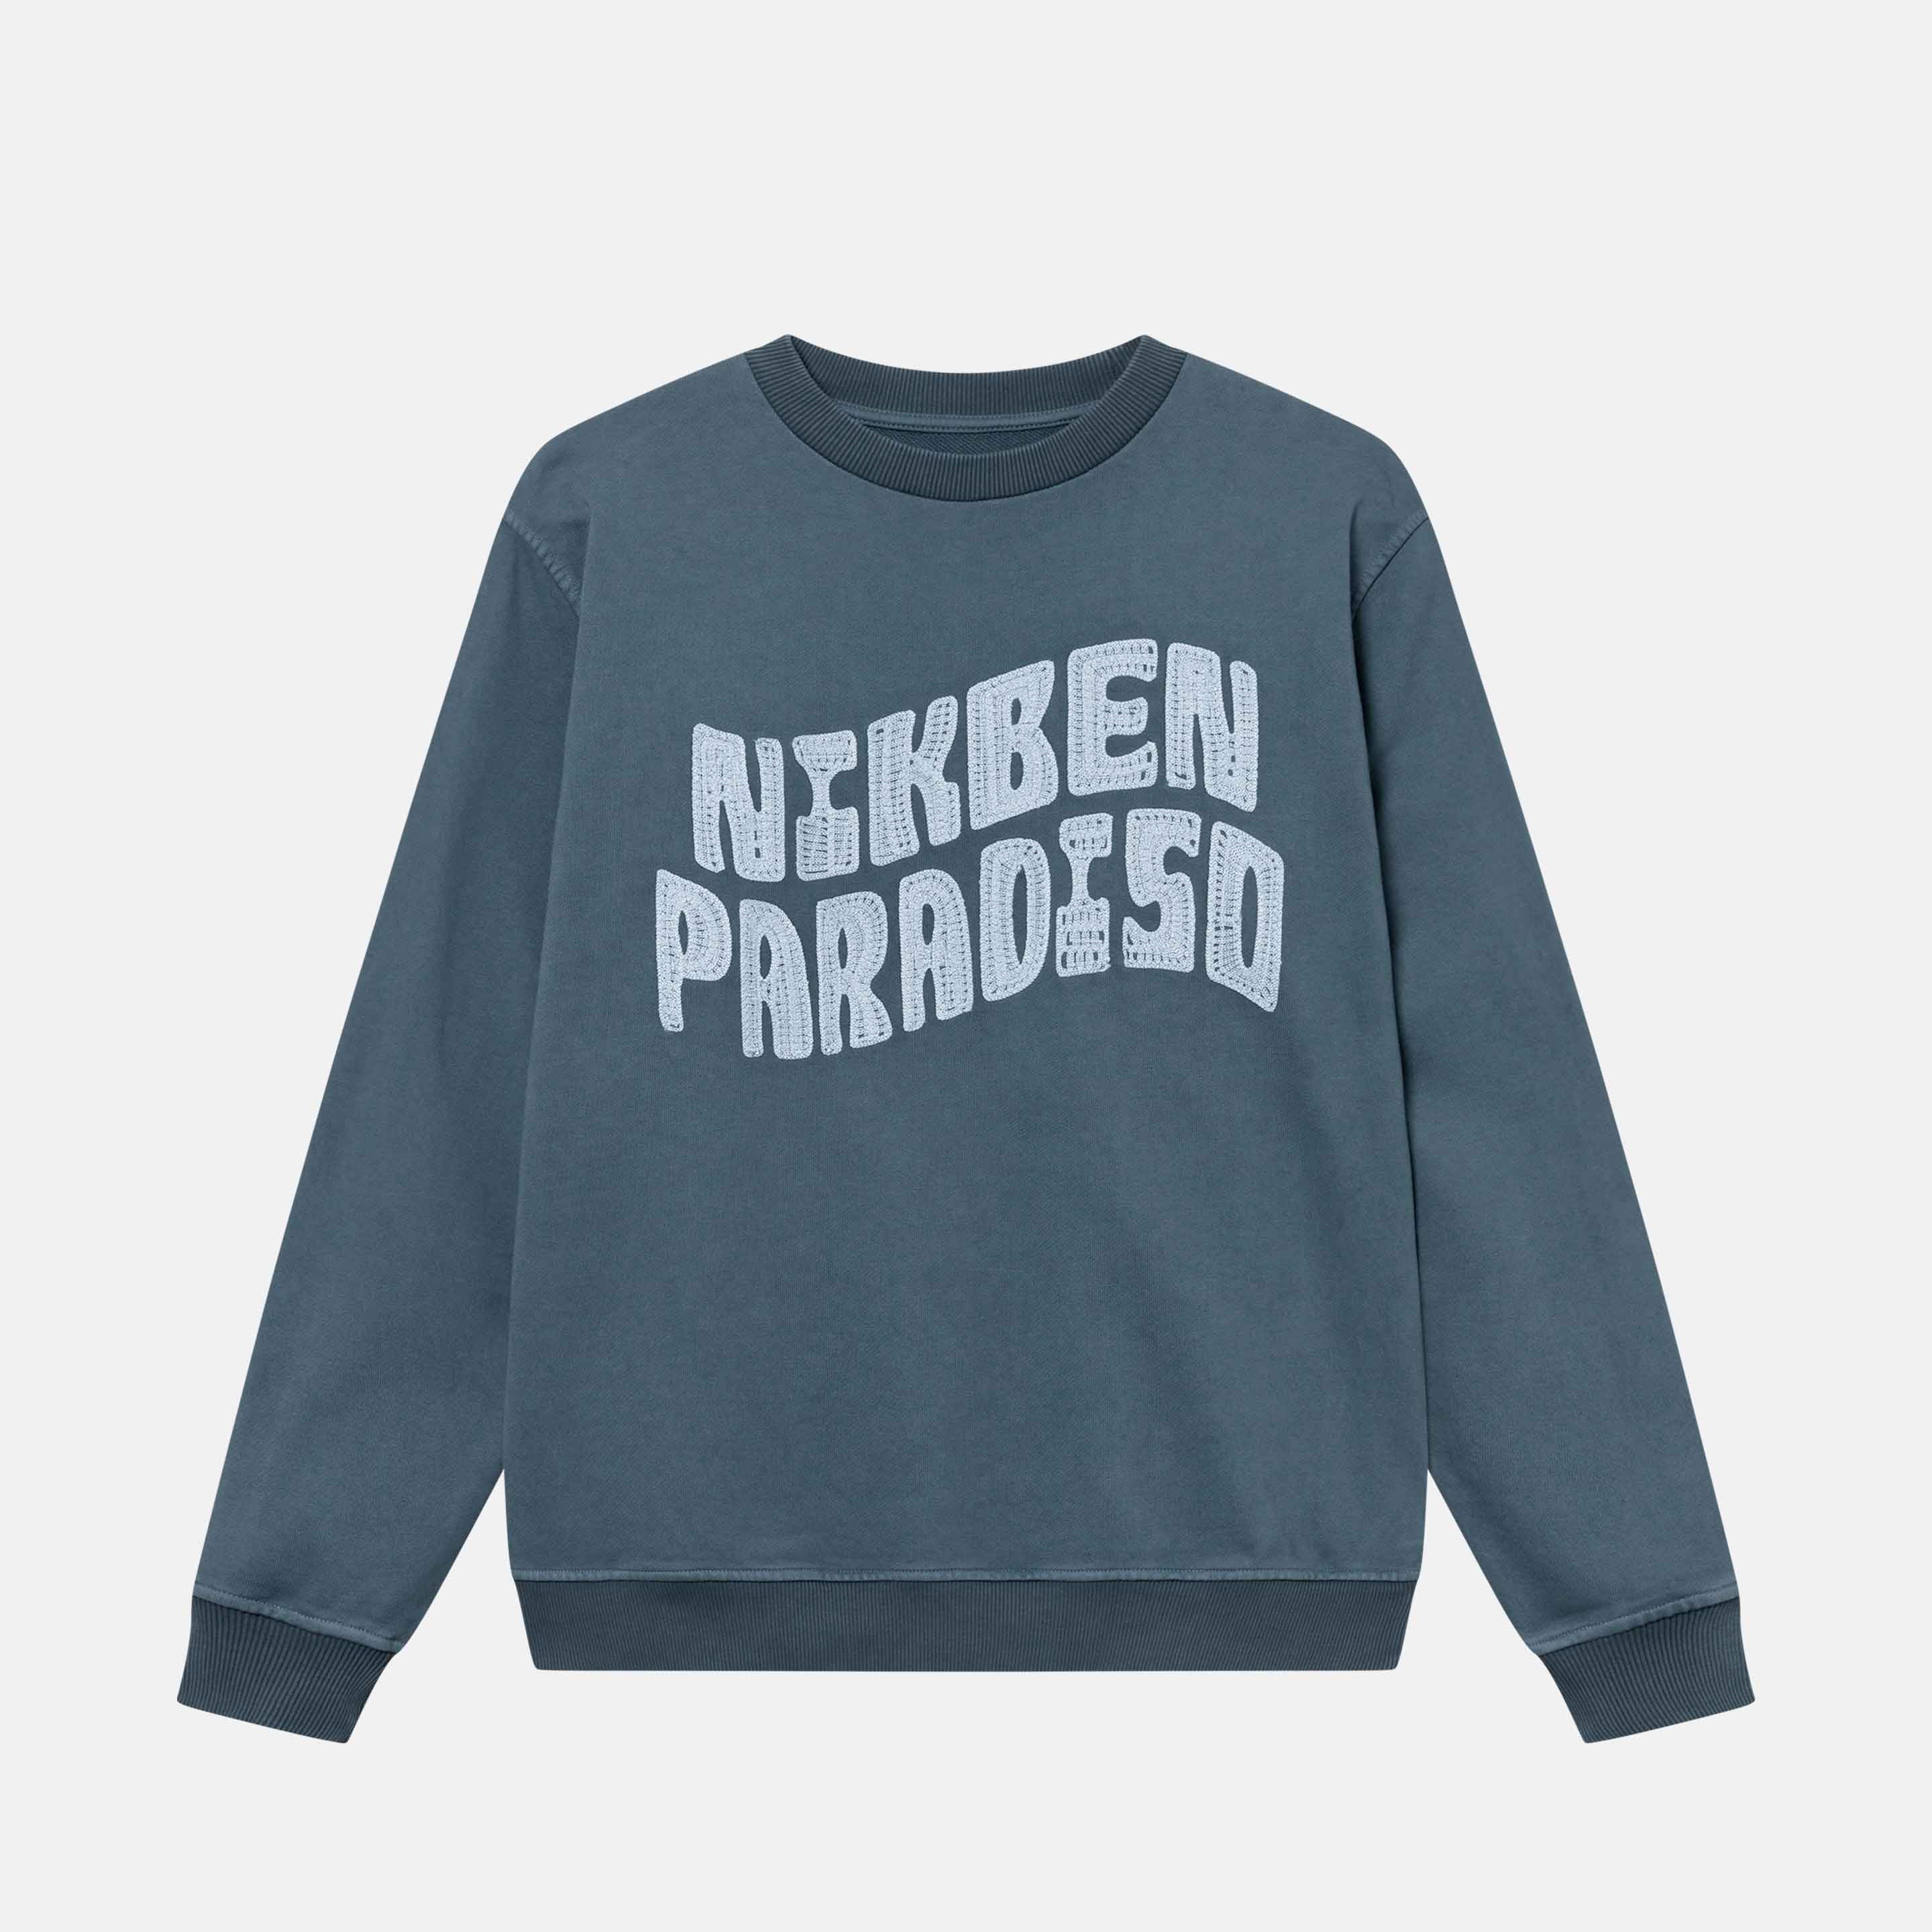 An anthracite sweatshirt with a "Nikben Paradiso" embroidery on its chest